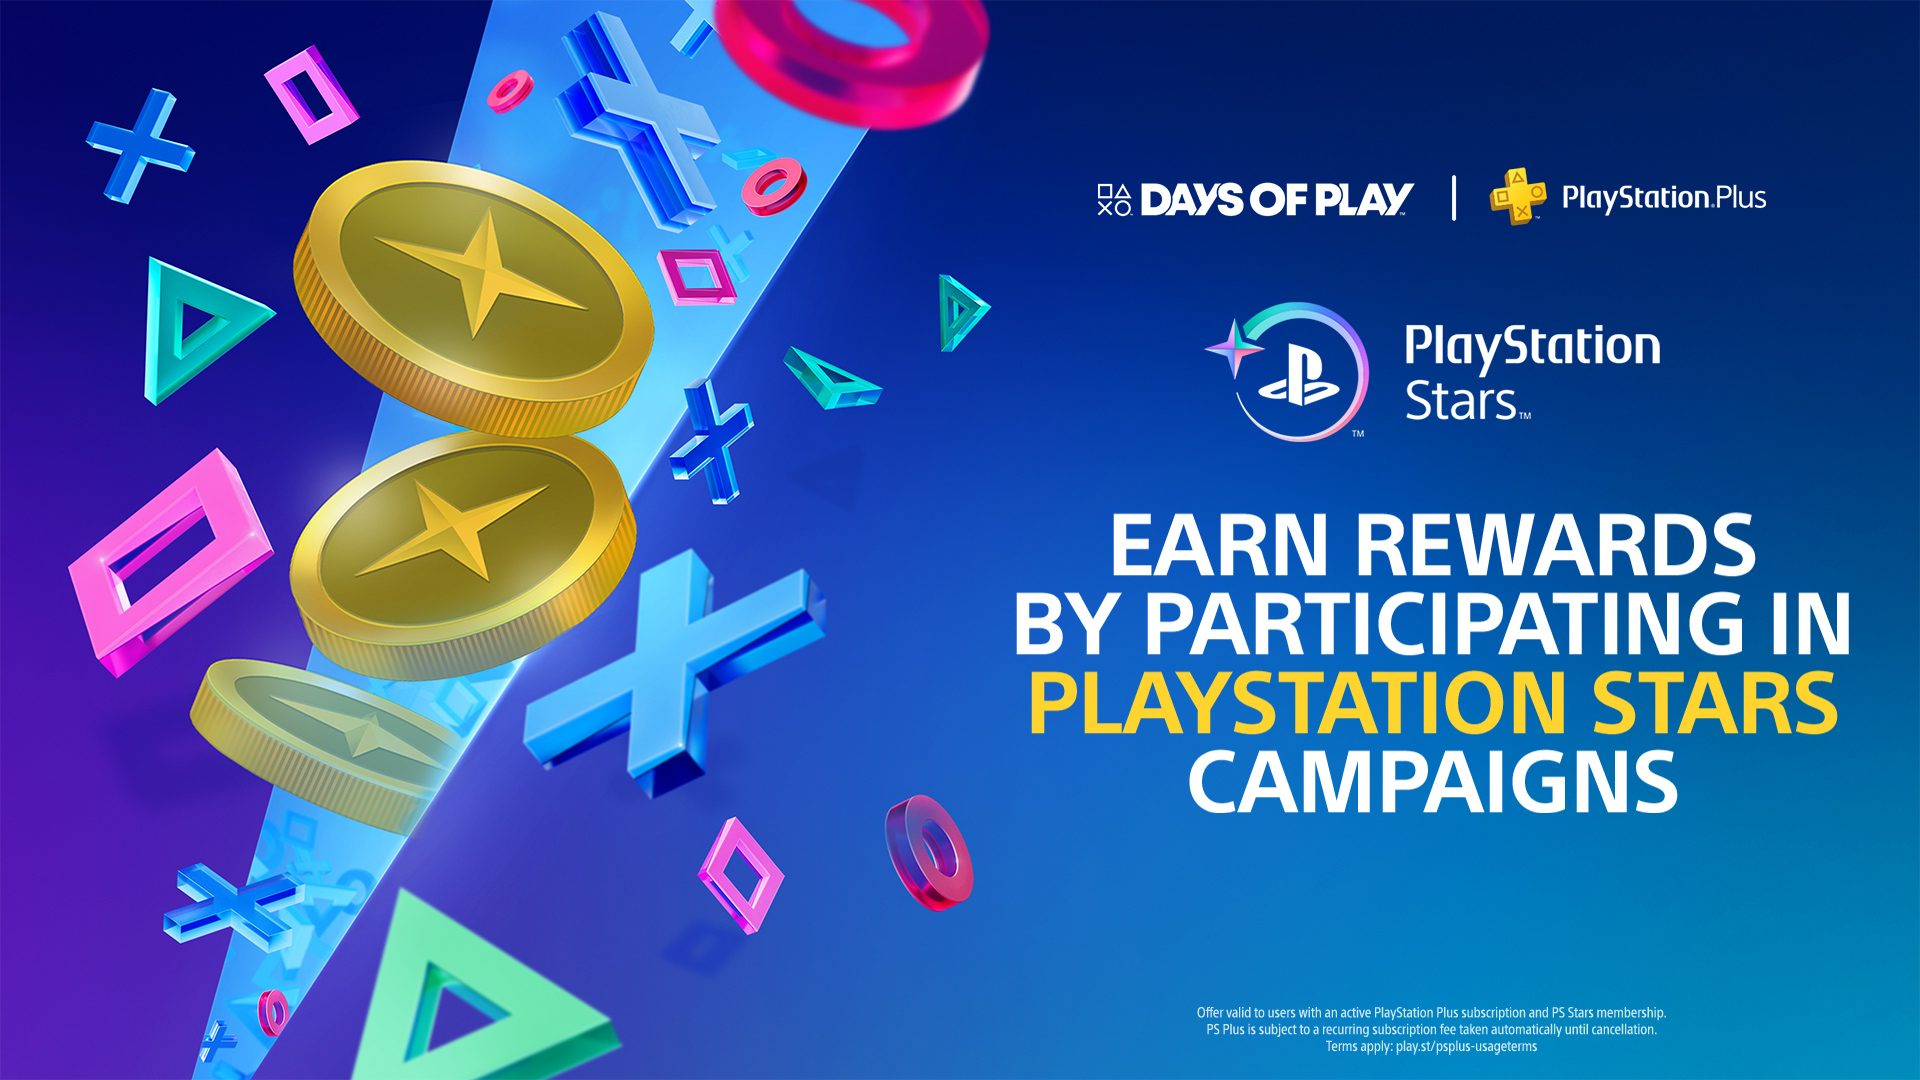 EARN REWARDS BY PARTICIPATING IN PLAYSTATION STARS CAMPAIGNS.